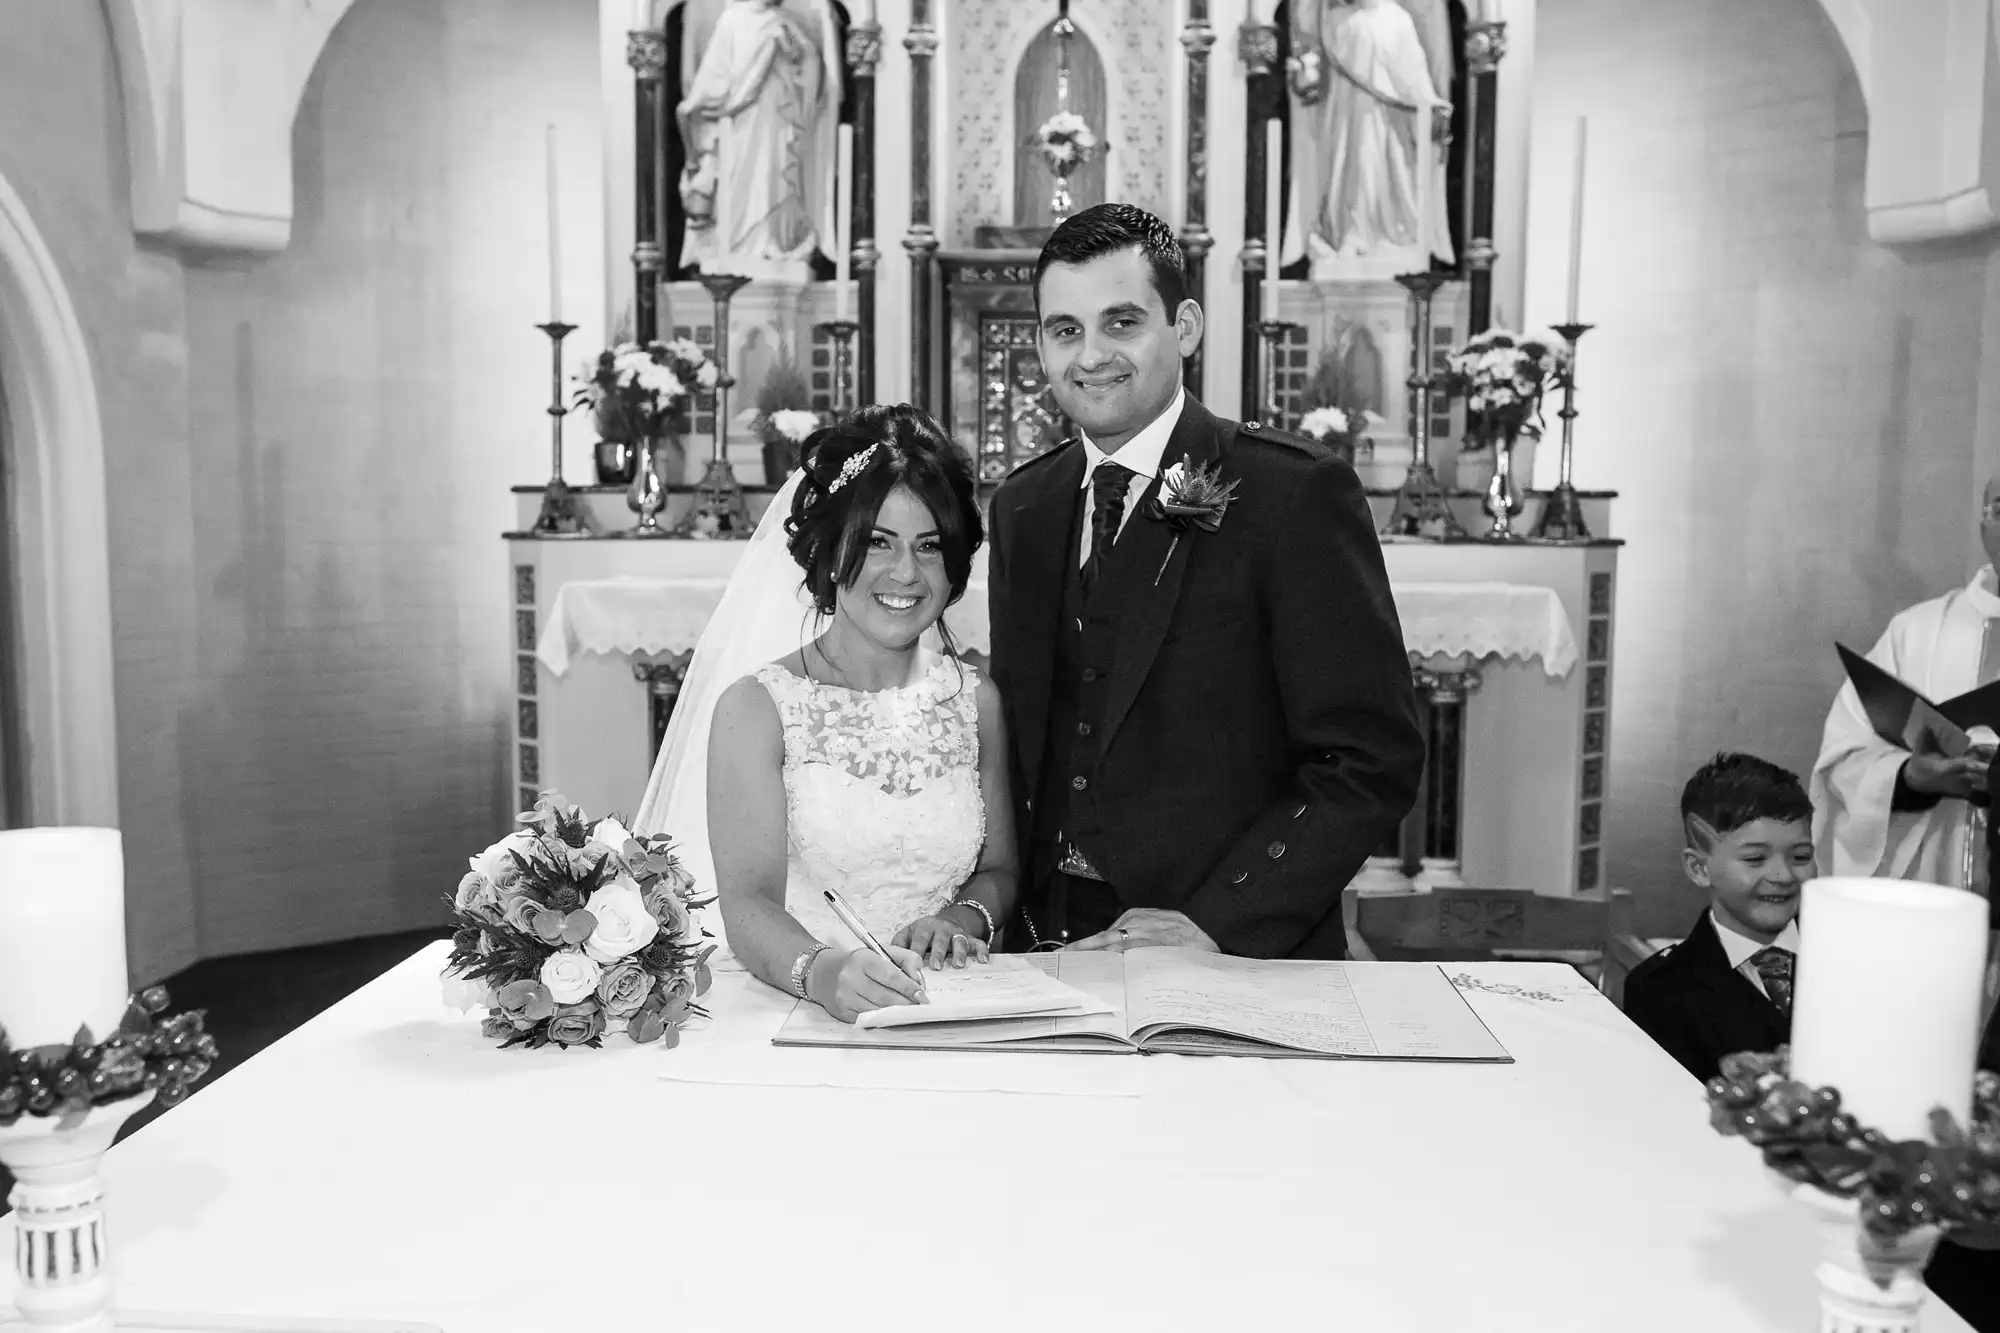 A bride and groom smiling and signing the marriage register in a church, with candles on the table and a priest behind them.